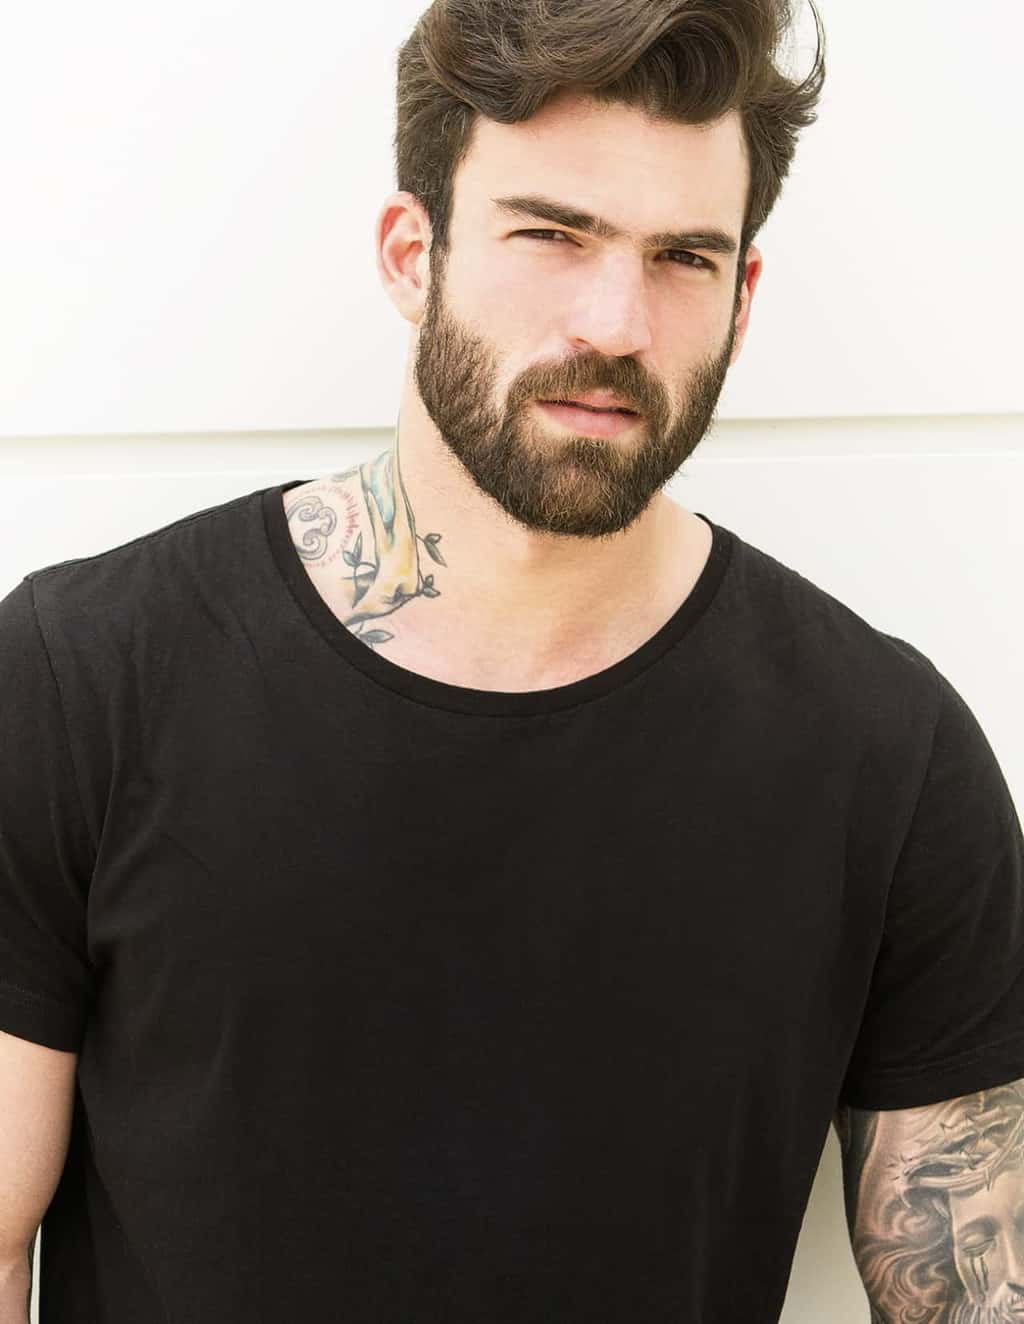 Top 10 Hottest Beard Styles For Men - vrogue.co